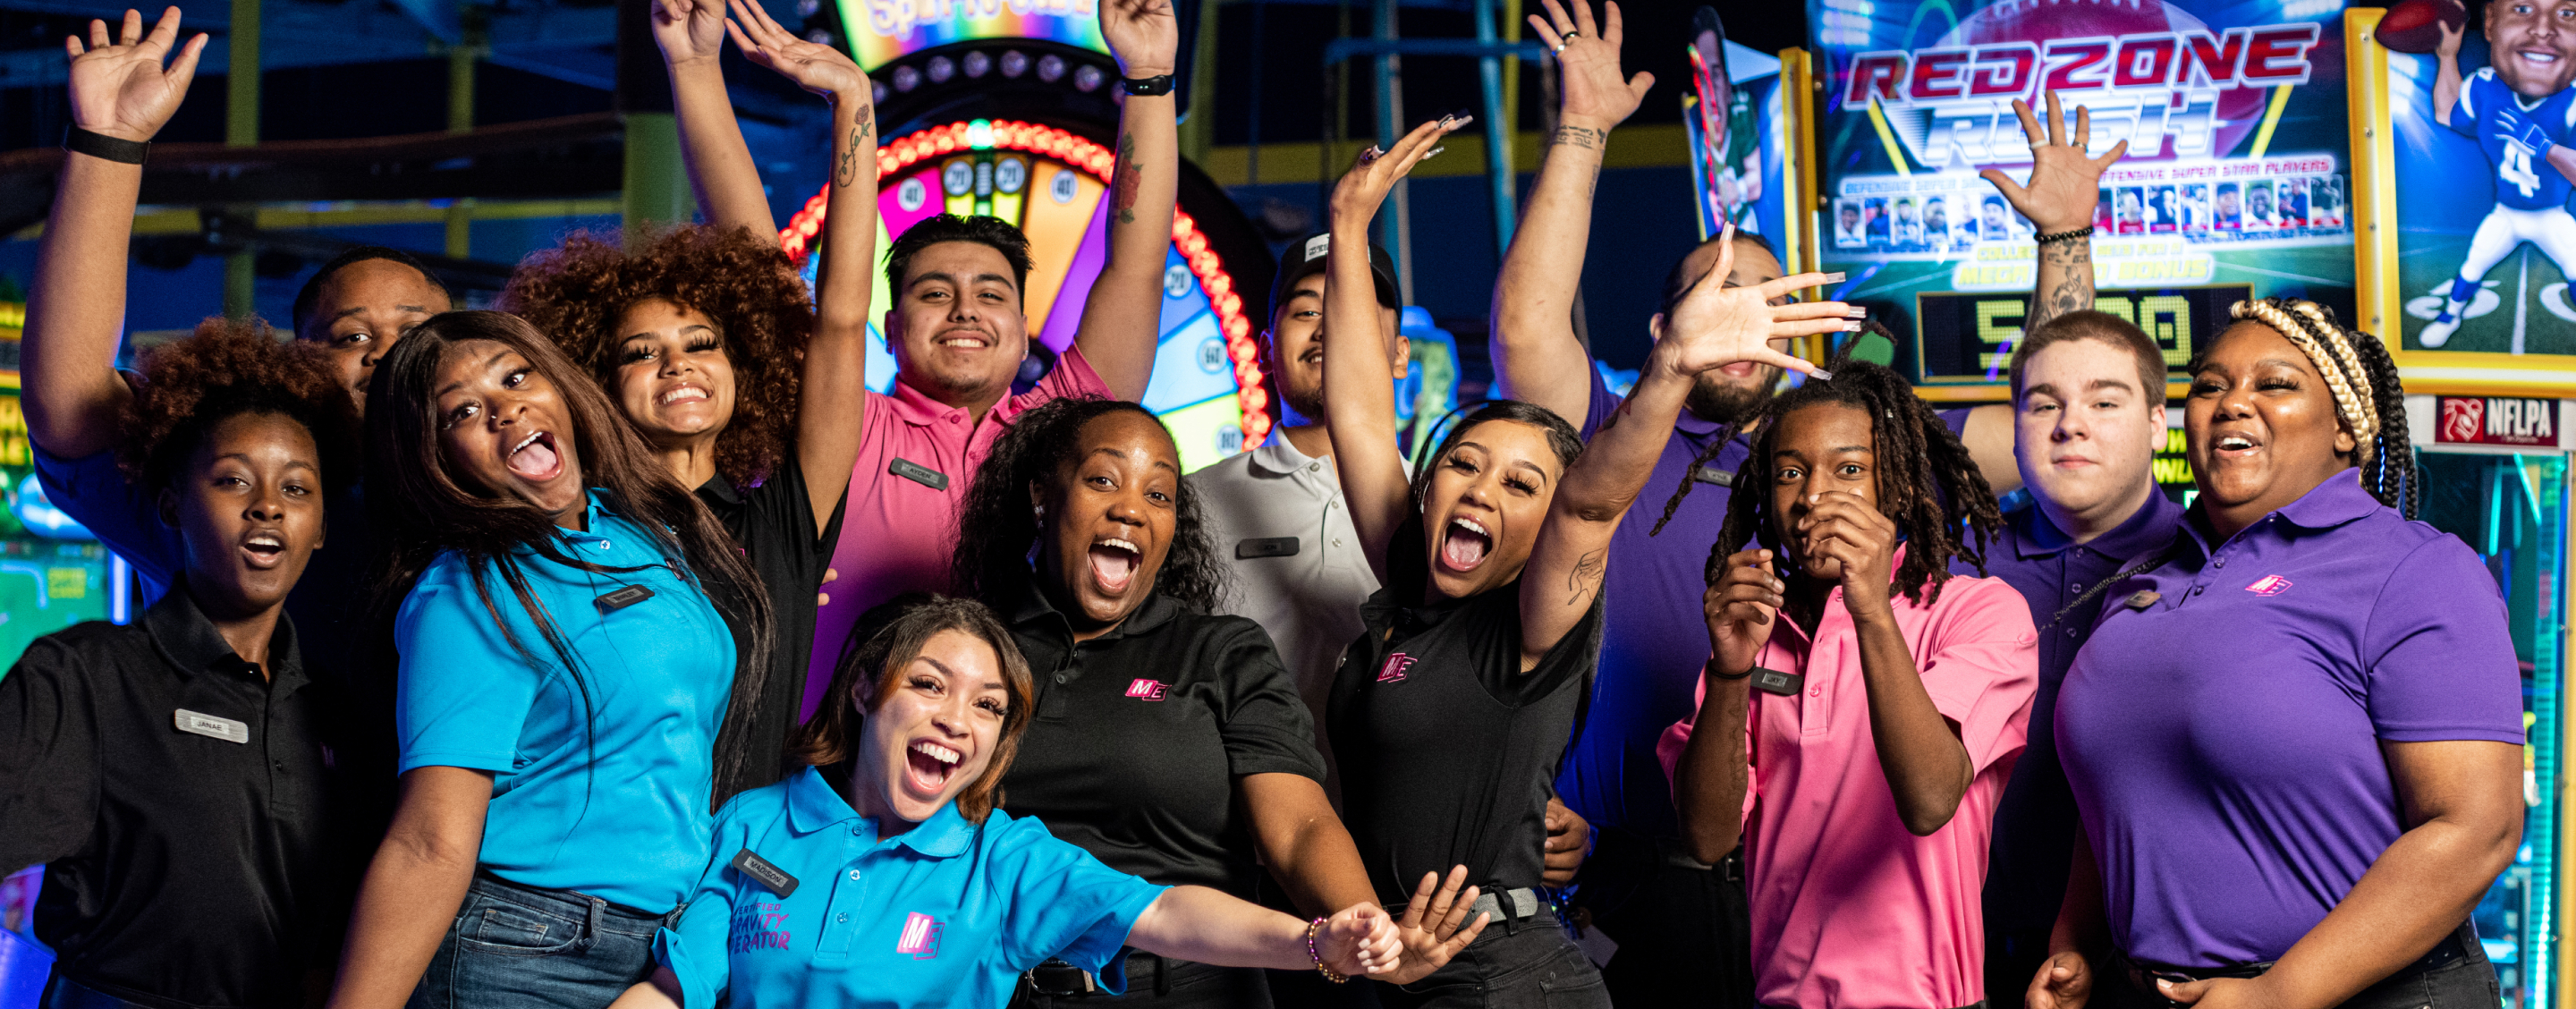 At Main Event, vibrant team members welcome you to a world of colorful play.